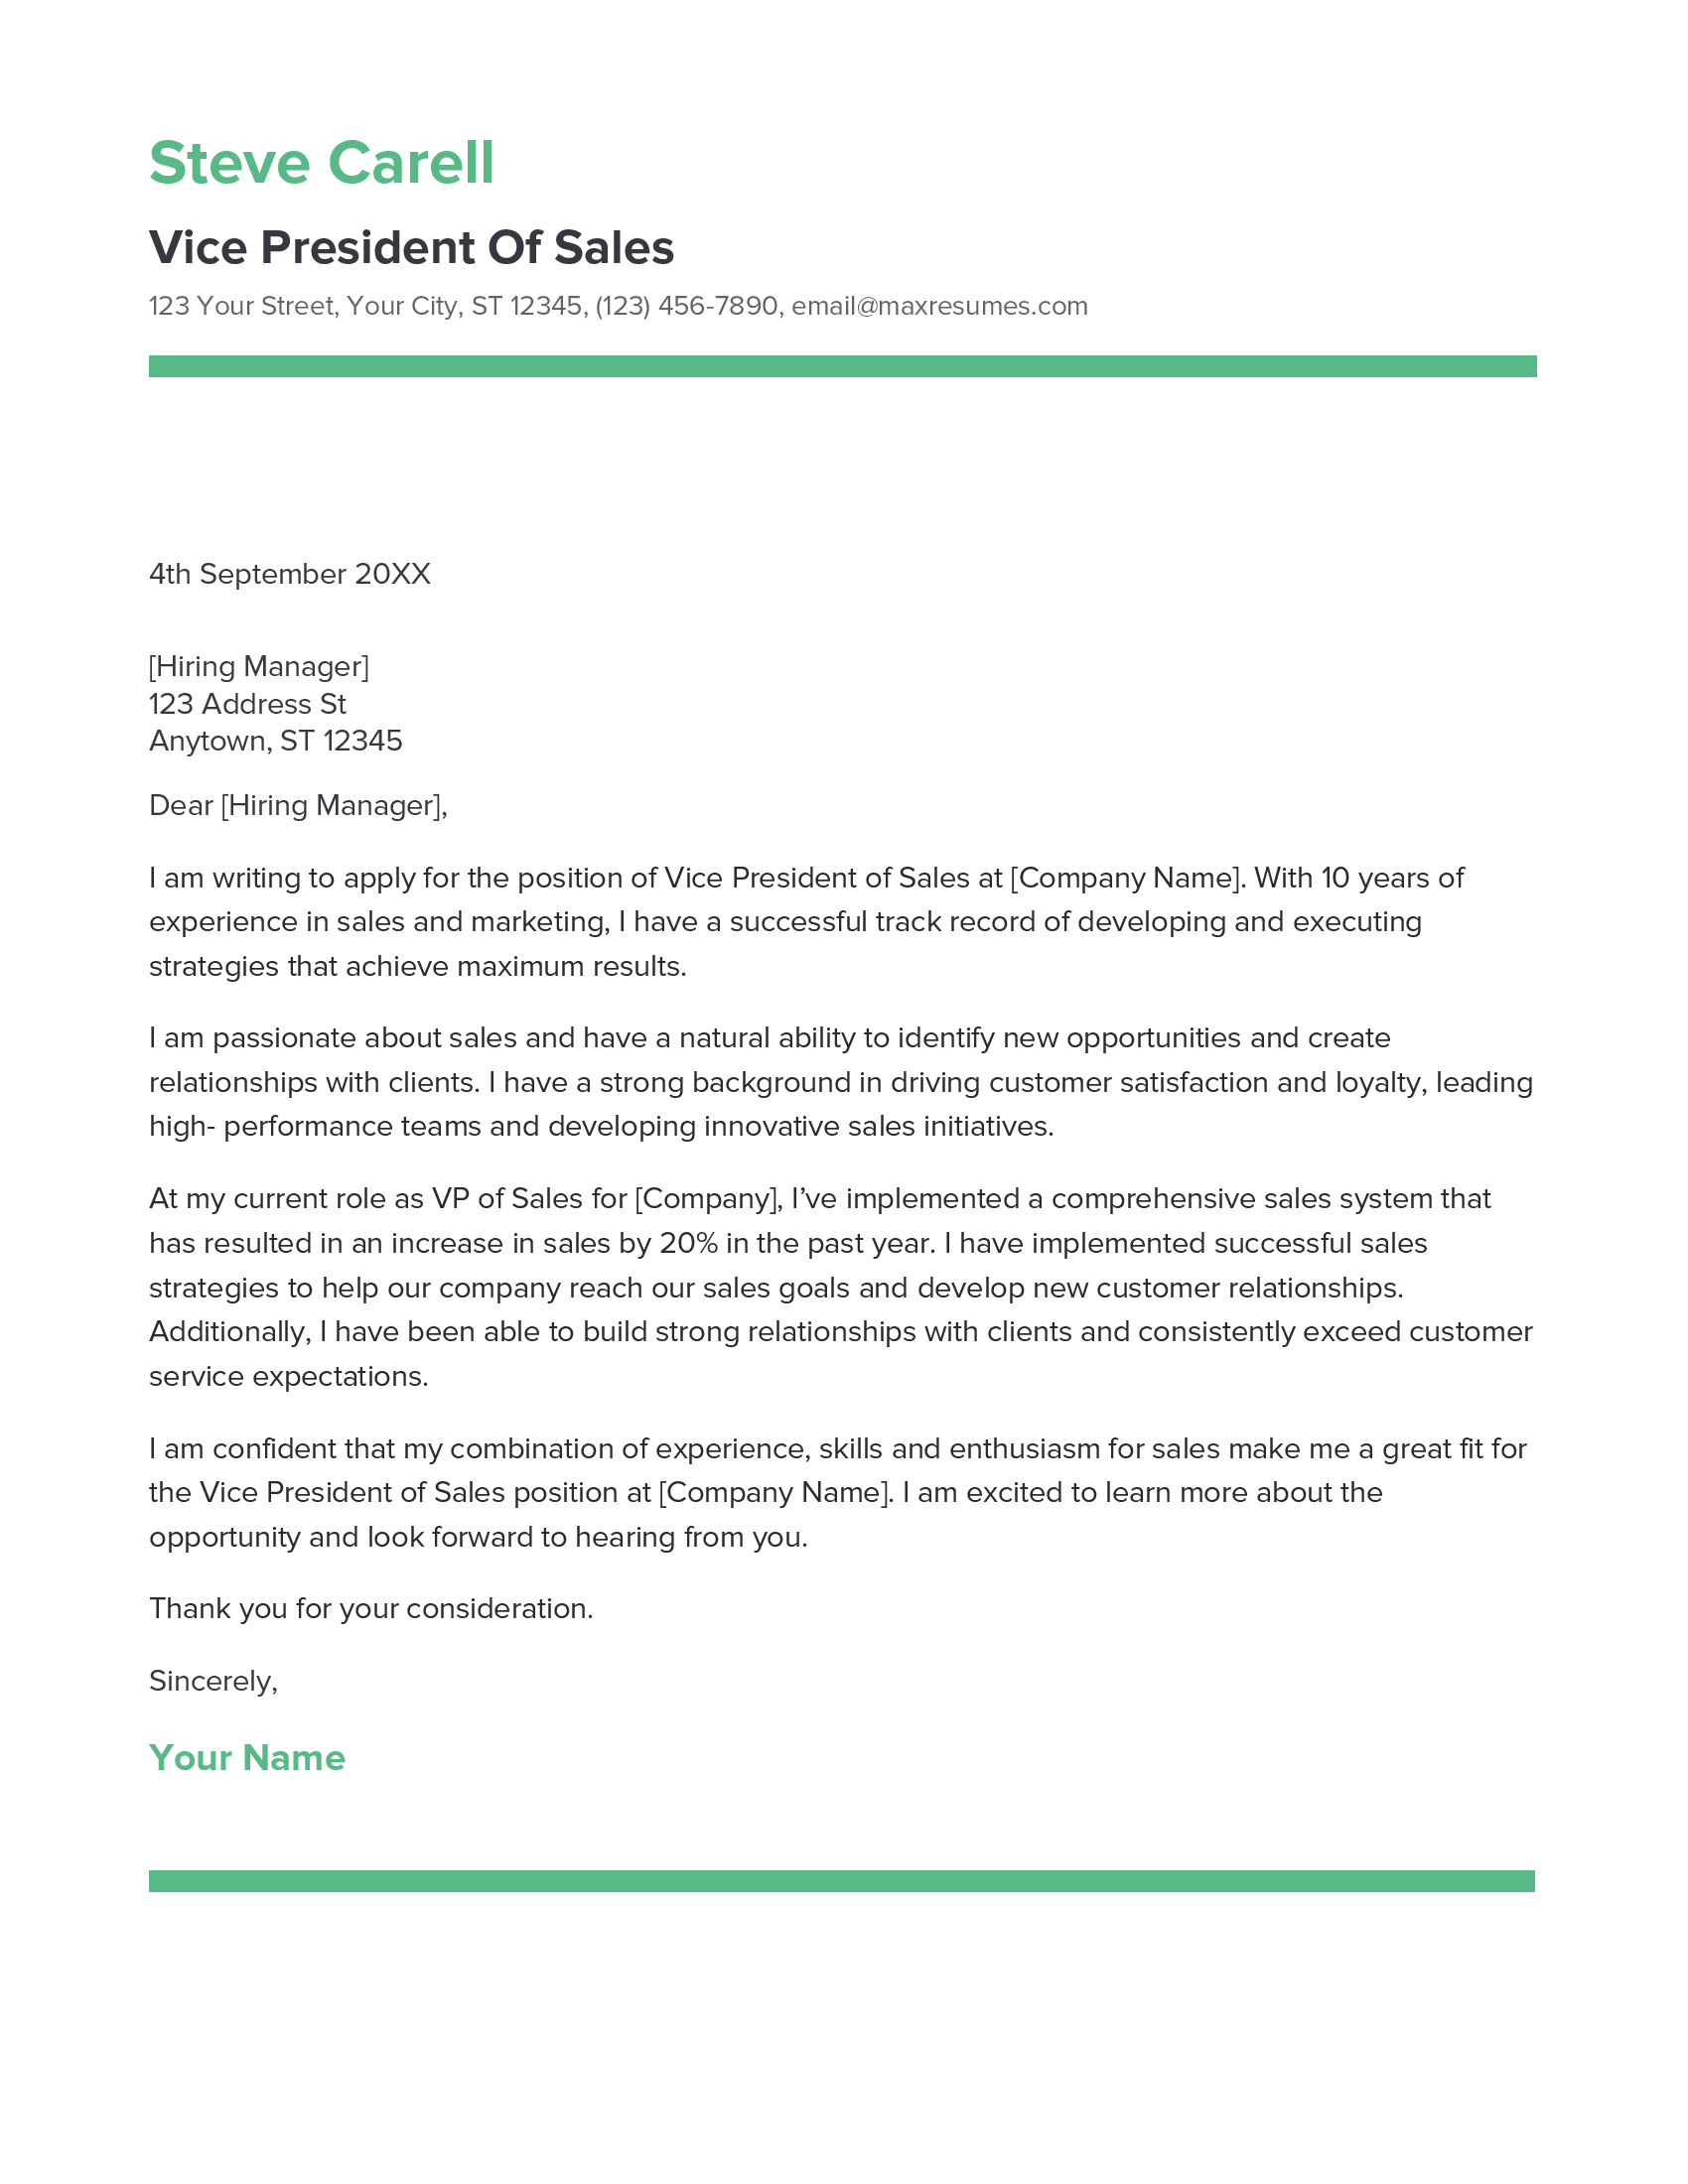 Vice President Of Sales Cover Letter Example